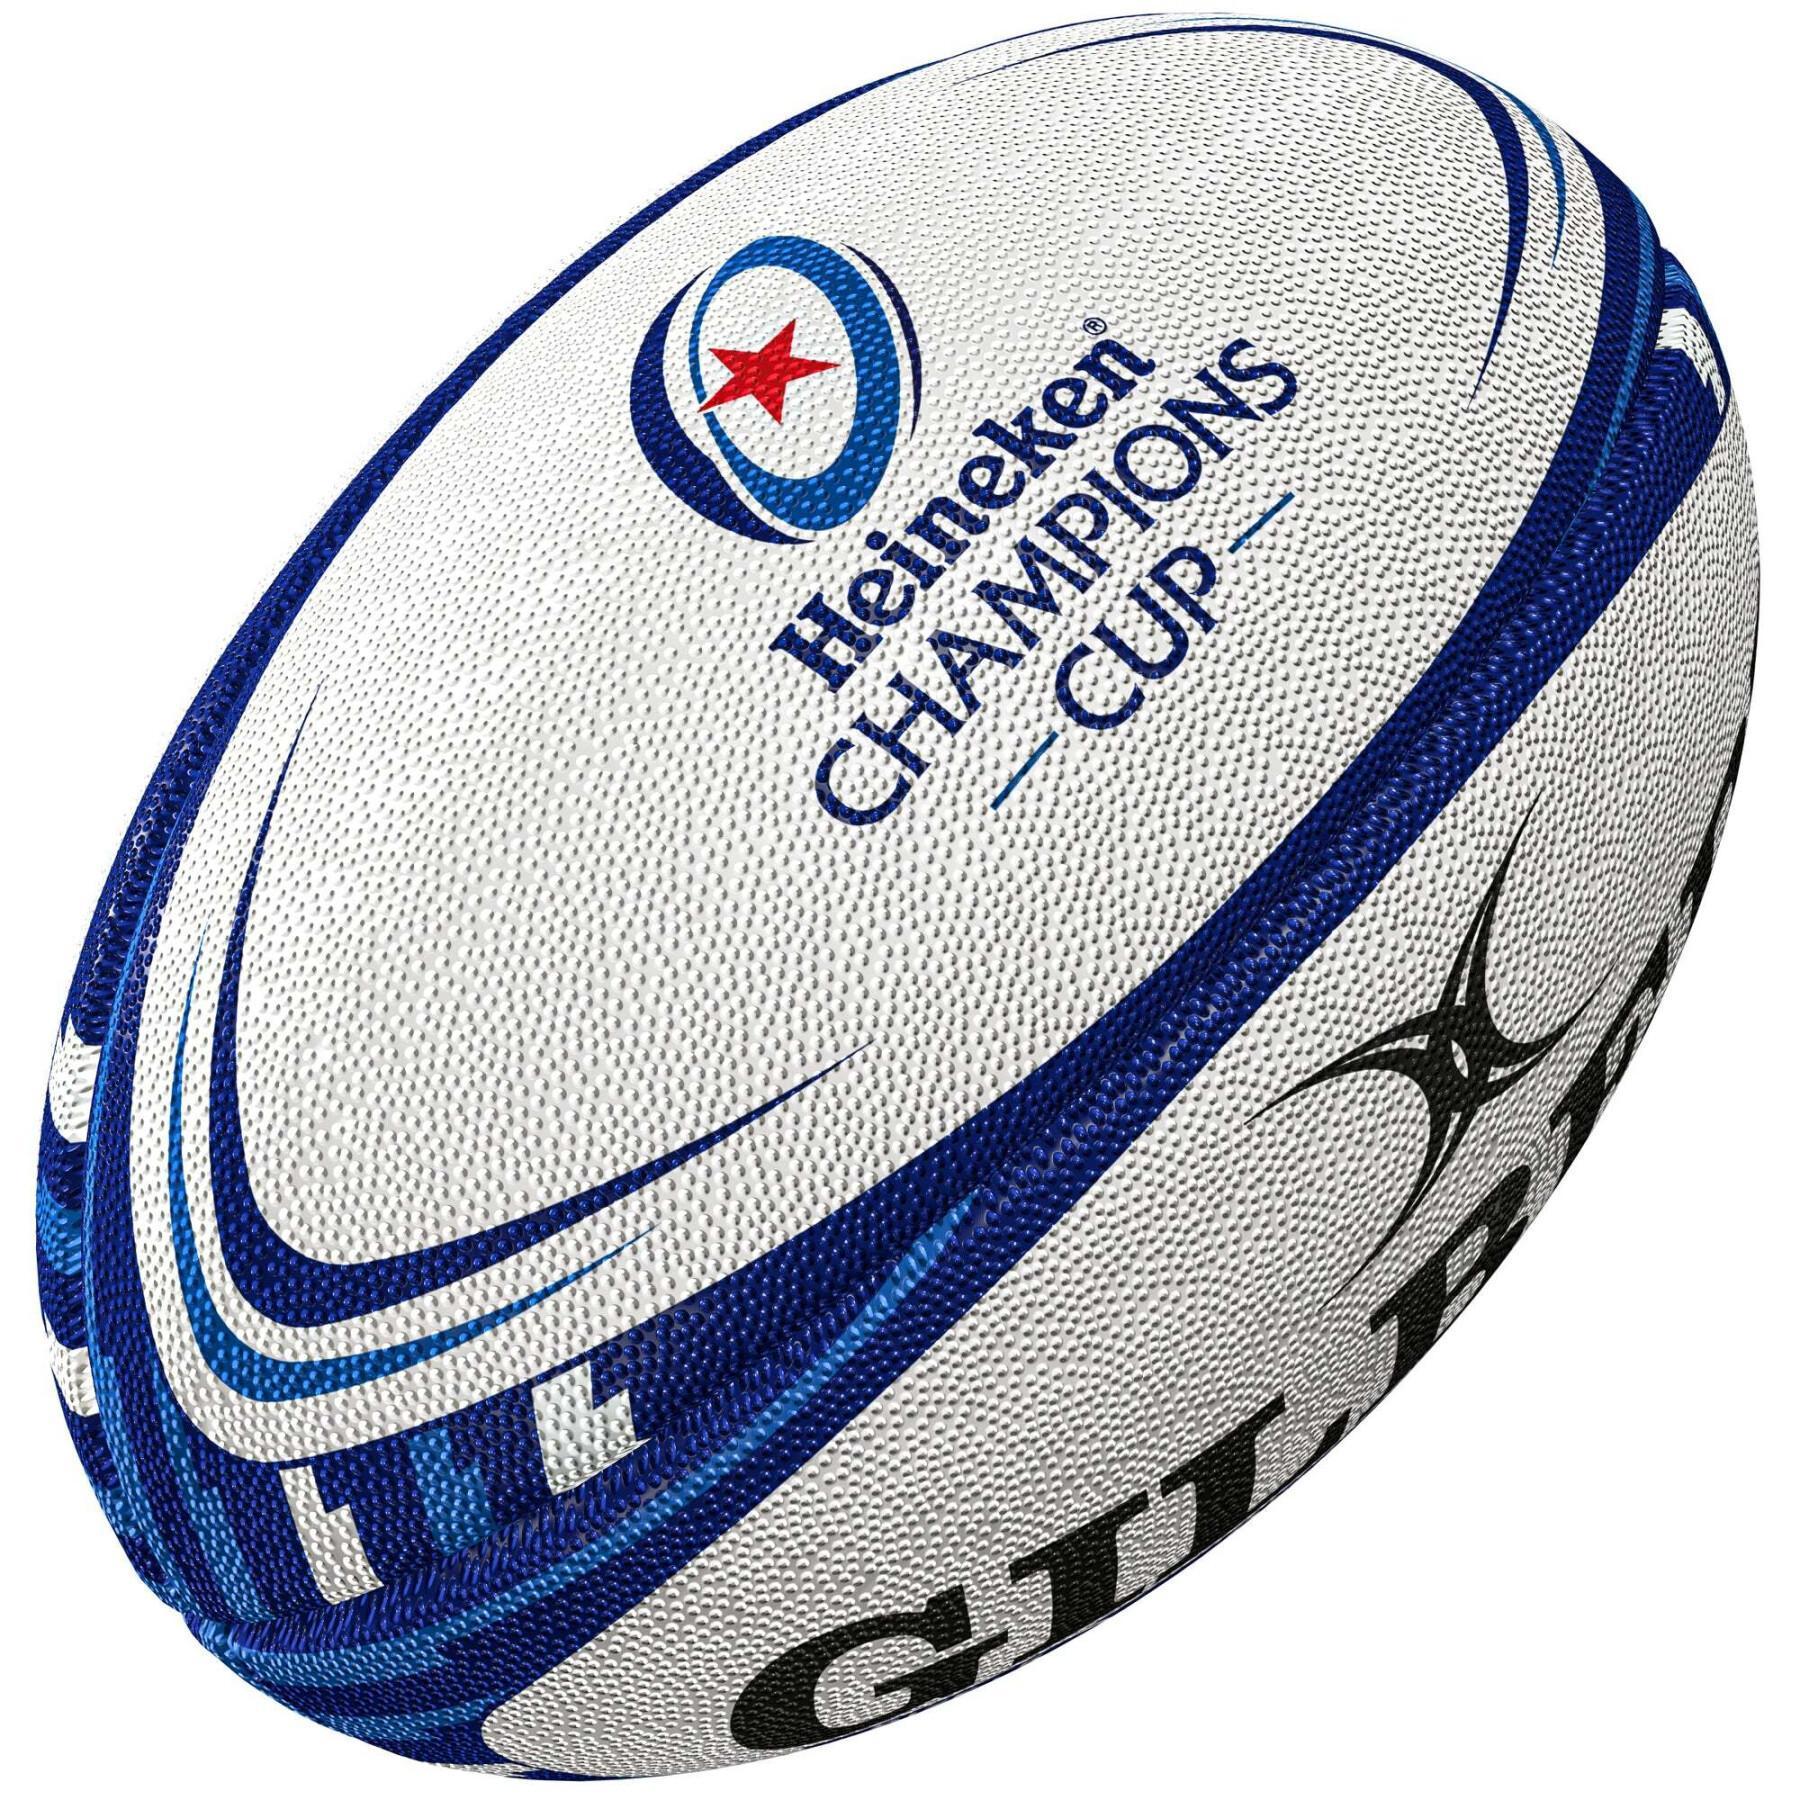 Rugby ball Gilbert Champions Cup